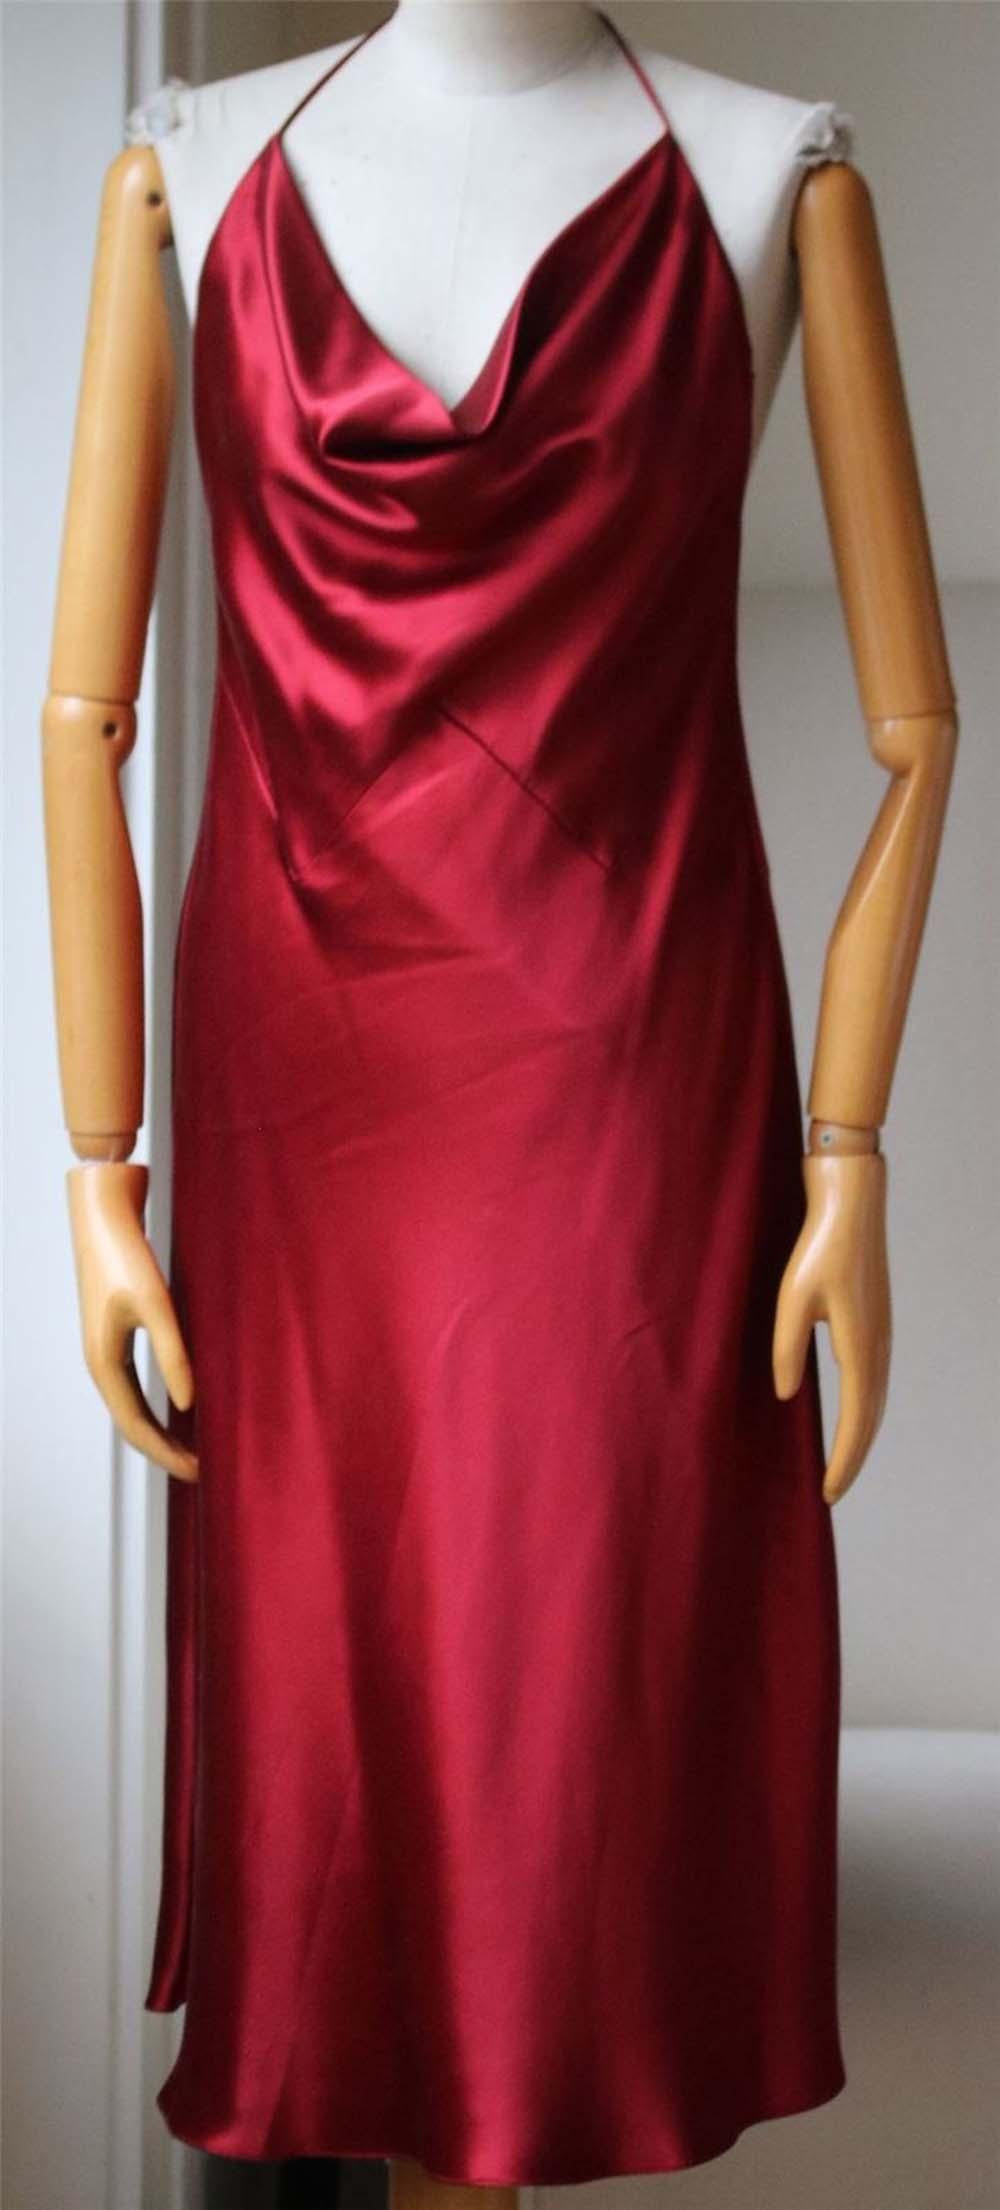 100% silk. Made in USA. Unlined. Draped fabric detail on front. Back tie accent at neck.

Size: US 6 (UK 10, FR 38, IT 42)

Condition: As new condition, no sign of wear. 